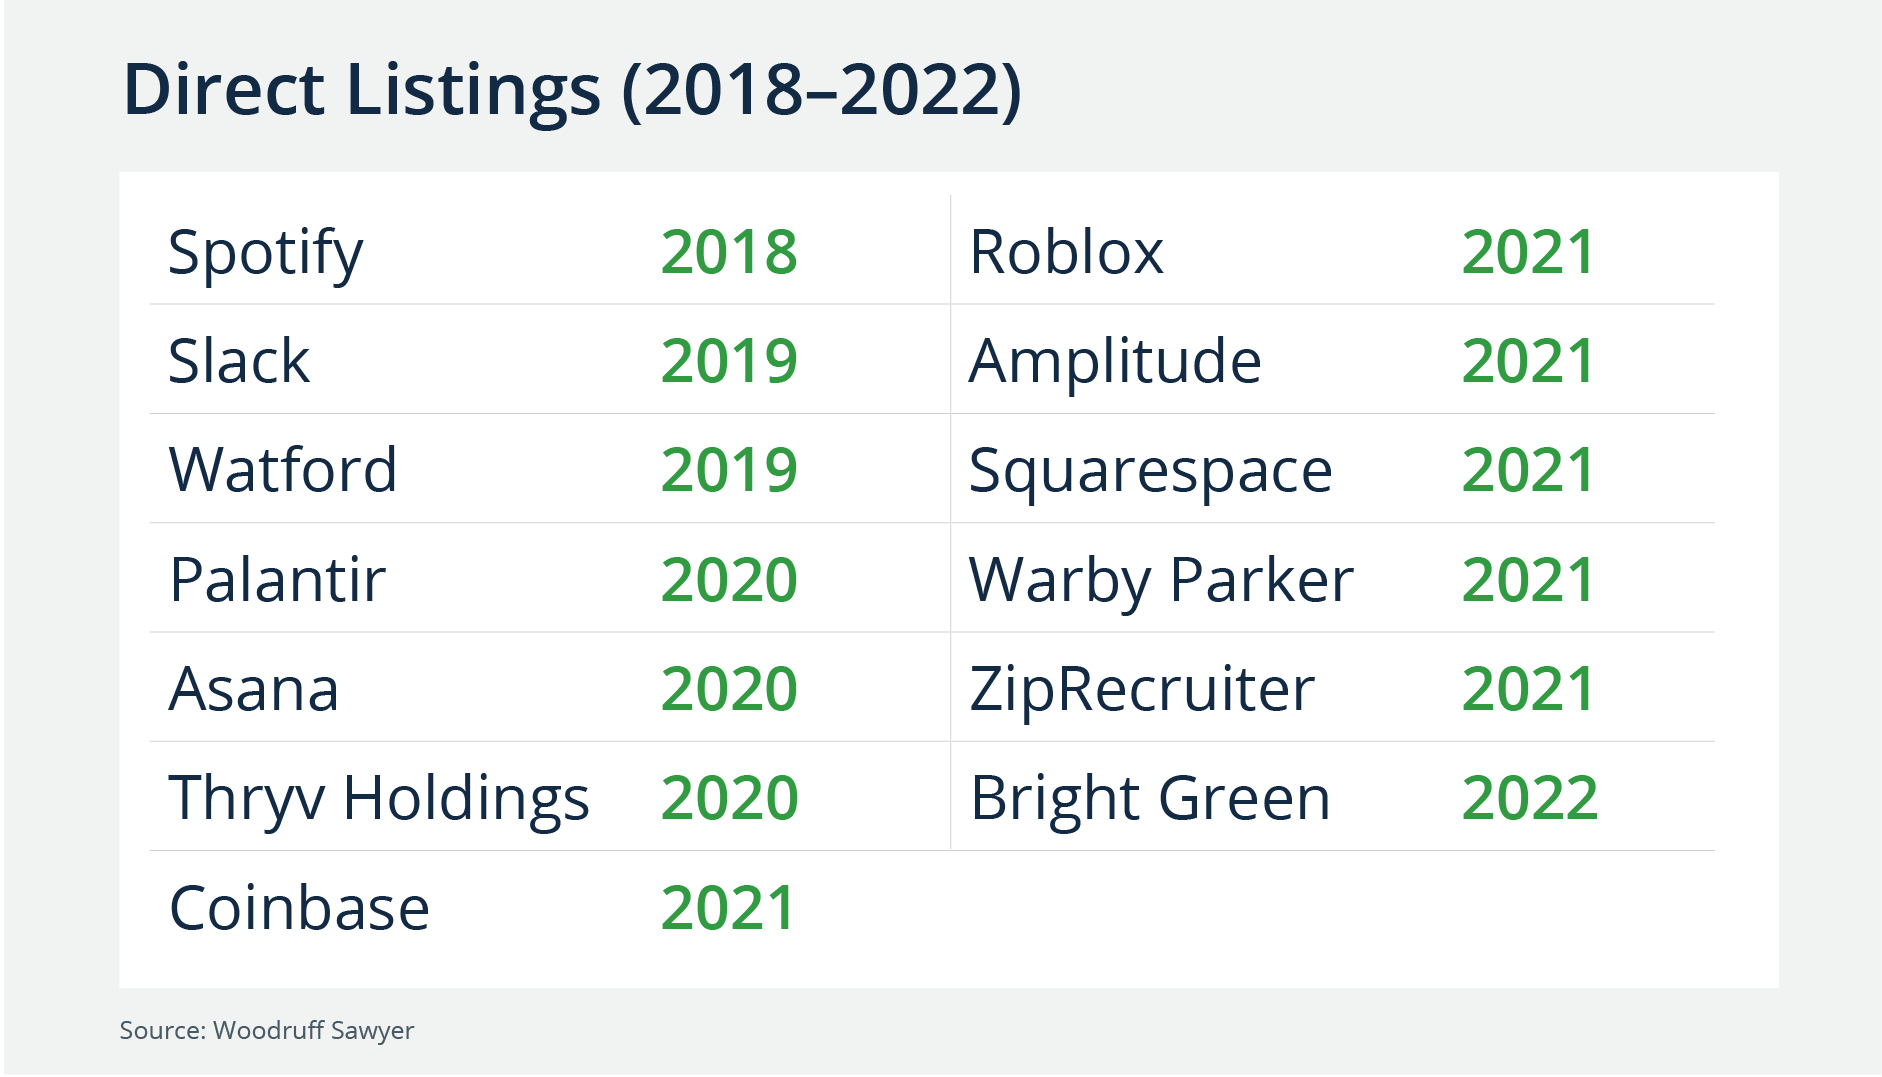 Direct Listings from 2018-2022